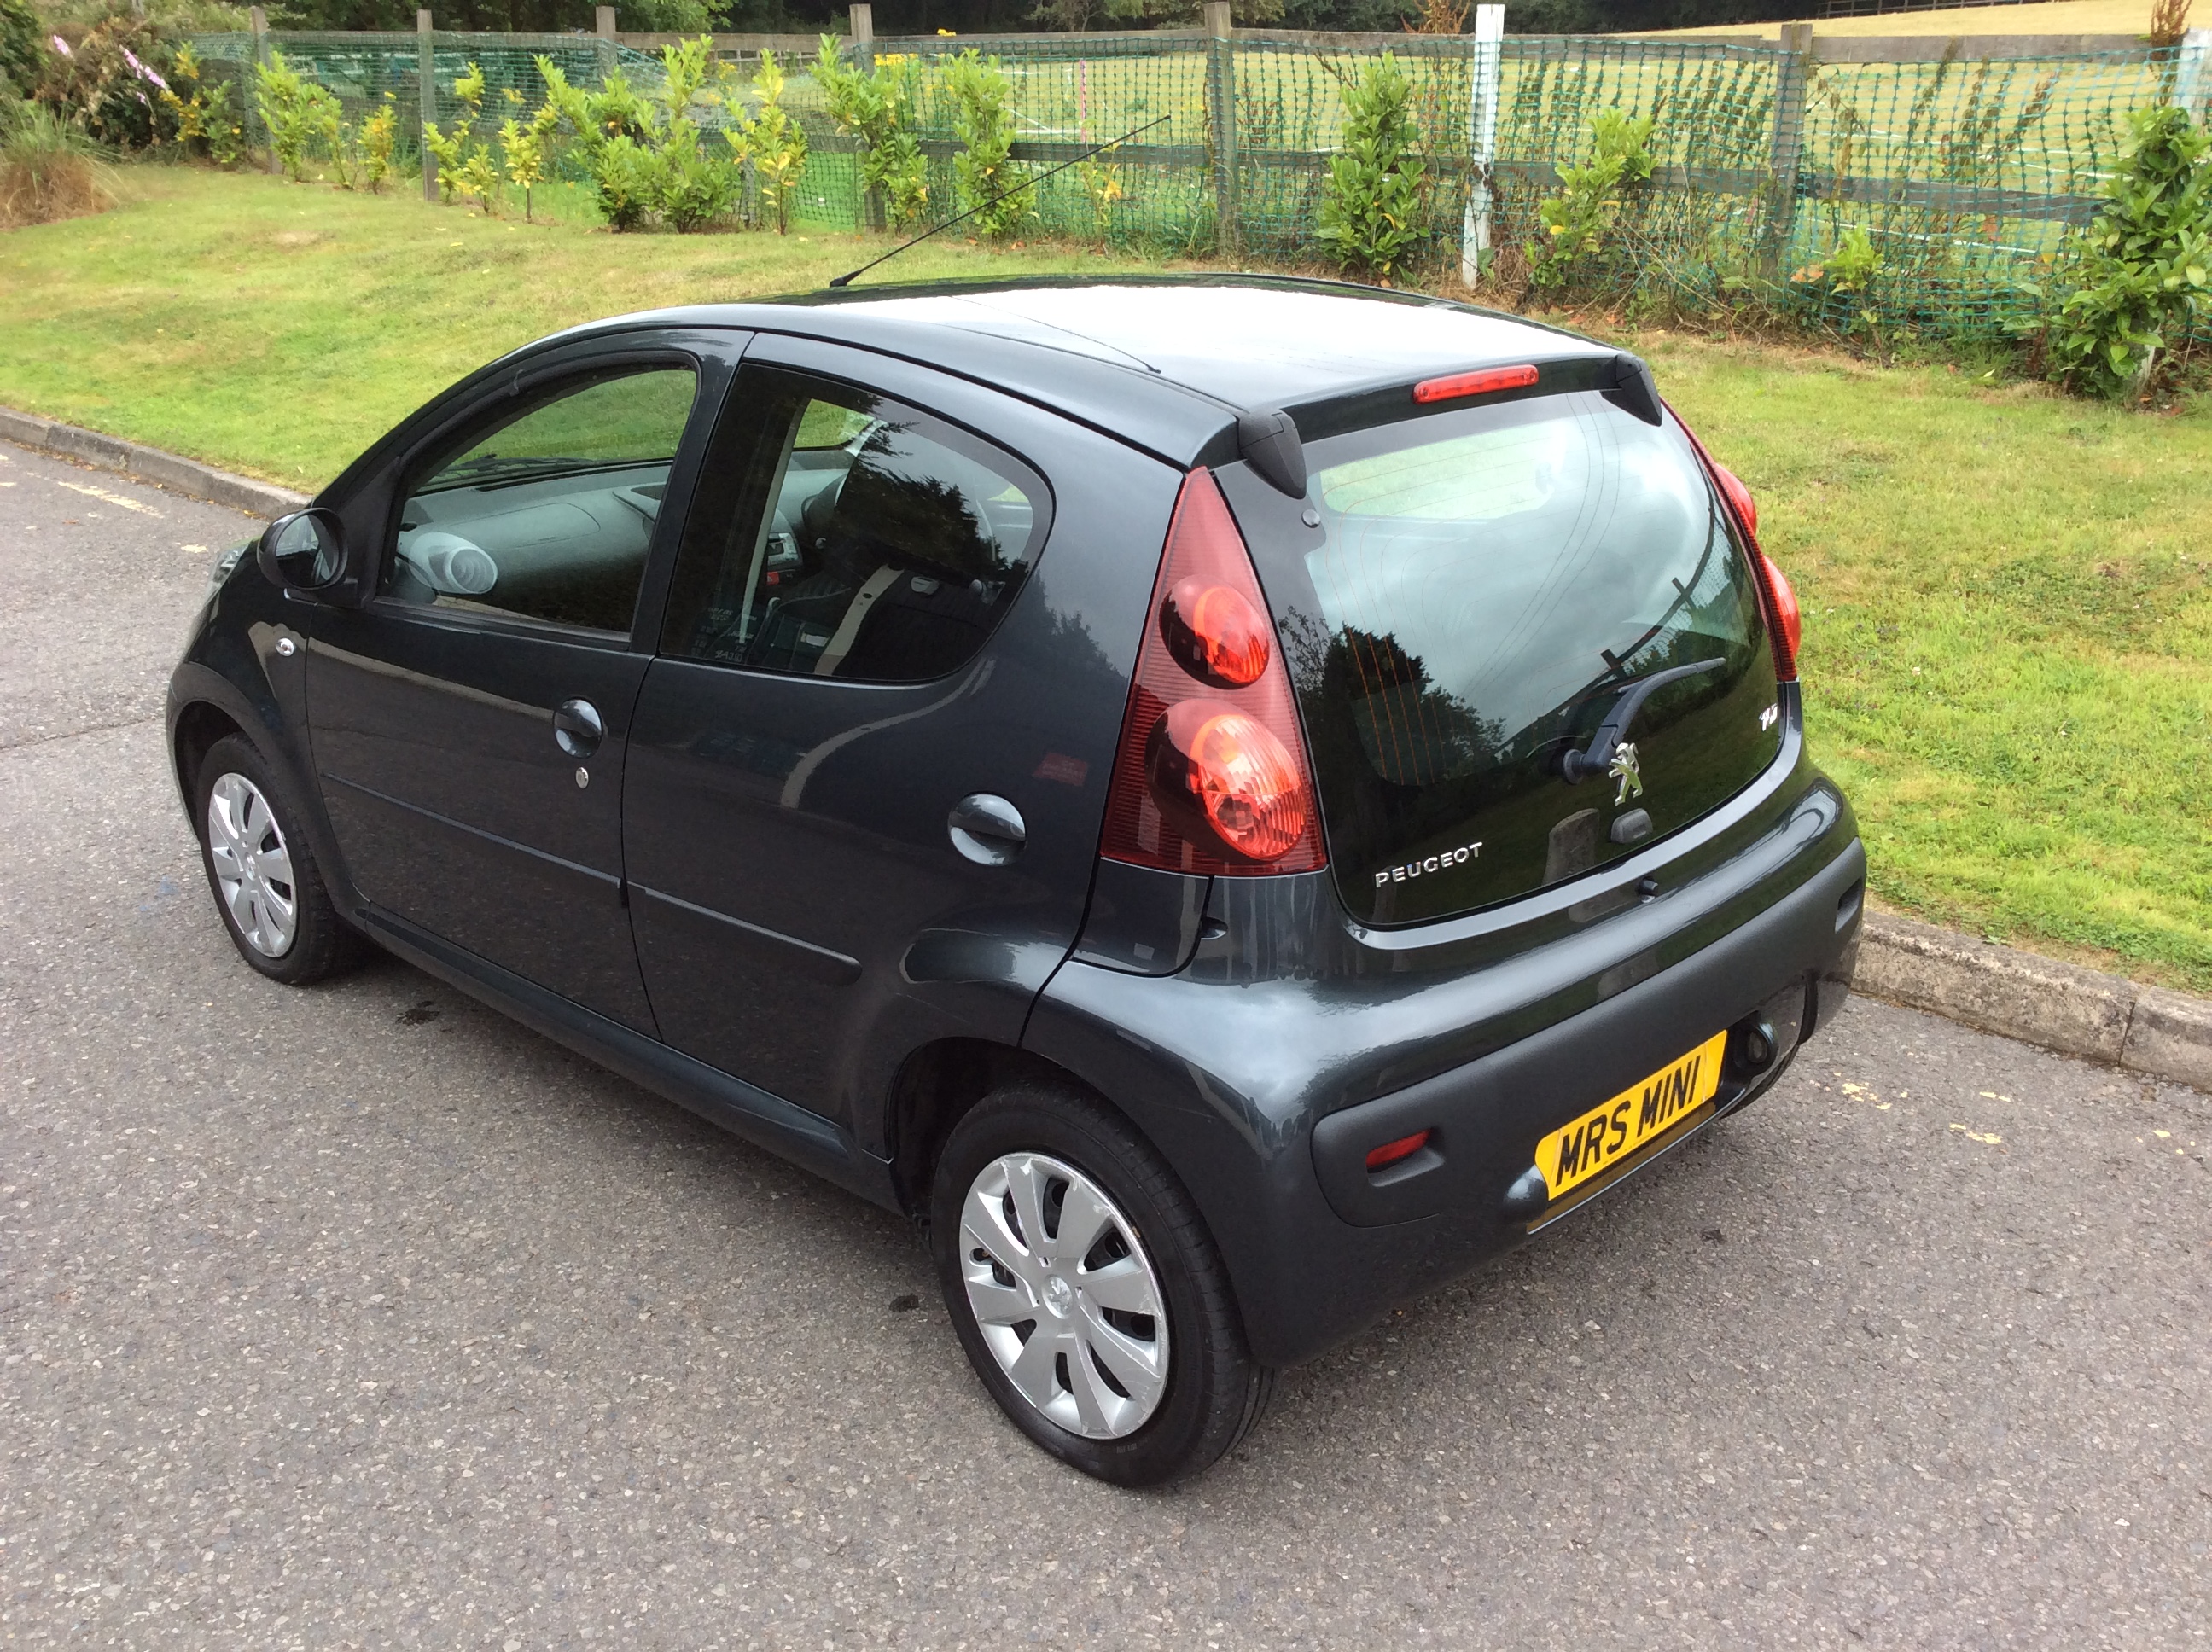 2013 Peugeot 107 1.0 12v Active 5dr in Grey - STUNNING with 25K miles ...